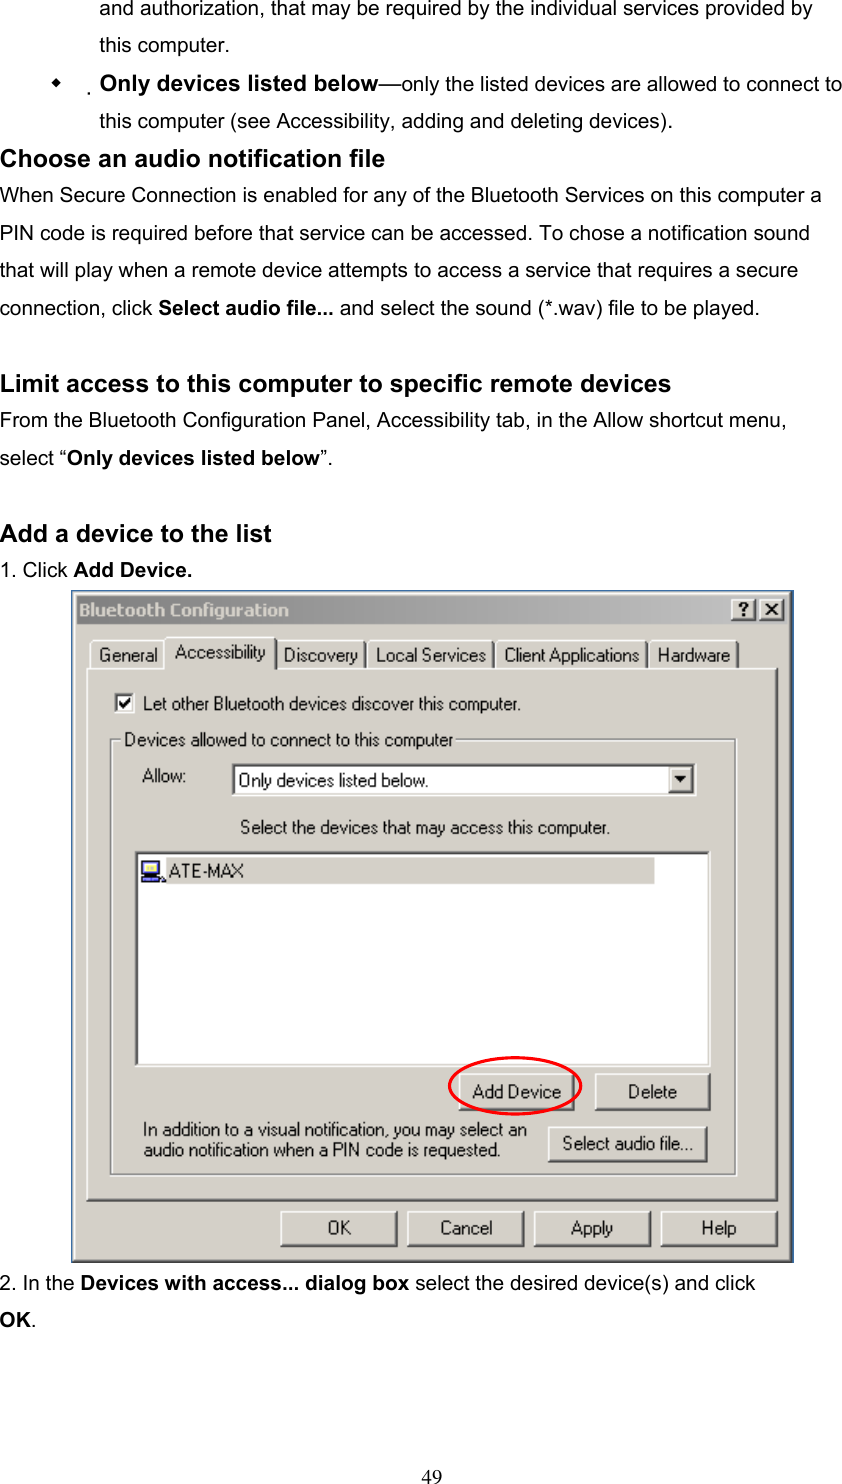 and authorization, that may be required by the individual services provided by this computer.   Only devices listed below—only the listed devices are allowed to connect to this computer (see Accessibility, adding and deleting devices). Choose an audio notification file When Secure Connection is enabled for any of the Bluetooth Services on this computer a PIN code is required before that service can be accessed. To chose a notification sound that will play when a remote device attempts to access a service that requires a secure connection, click Select audio file... and select the sound (*.wav) file to be played.  Limit access to this computer to specific remote devices   From the Bluetooth Configuration Panel, Accessibility tab, in the Allow shortcut menu, select “Only devices listed below”.  Add a device to the list 1. Click Add Device.  2. In the Devices with access... dialog box select the desired device(s) and click OK.    49 